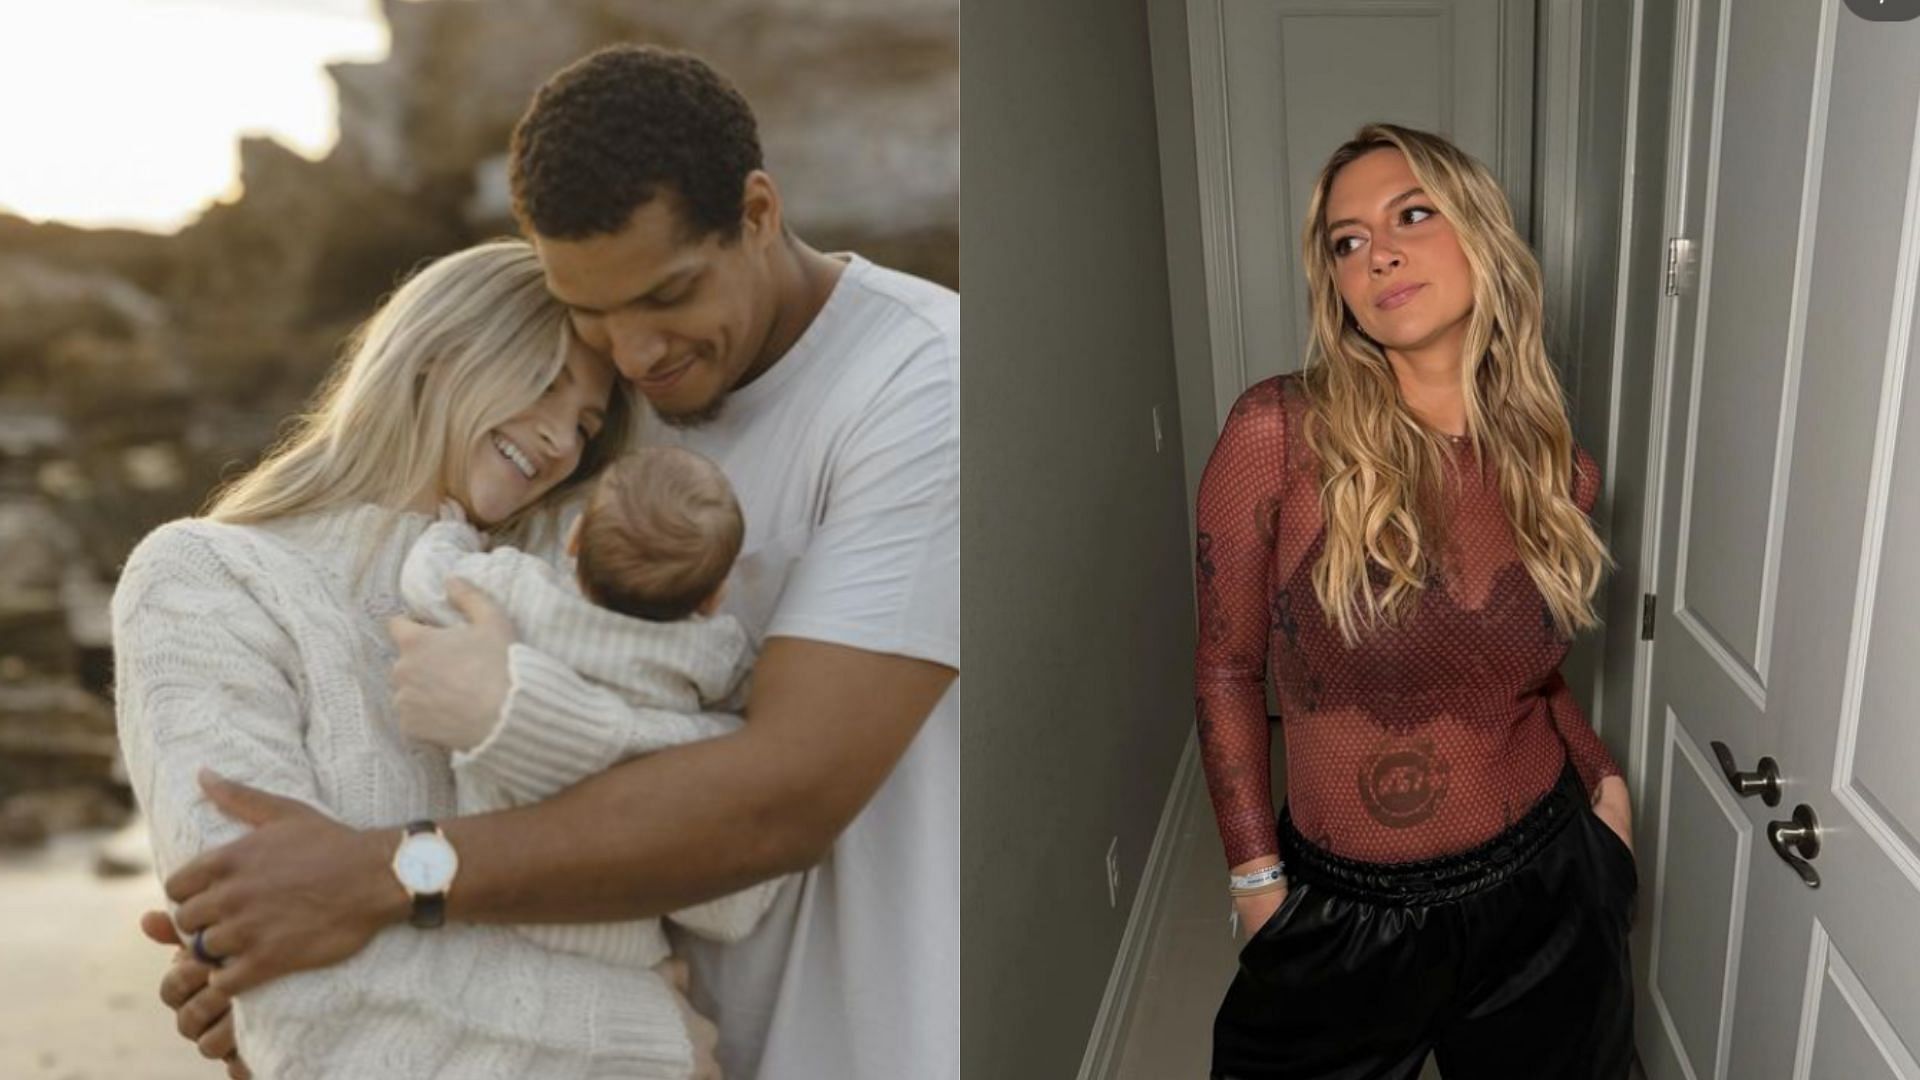 Allison Kuch and Isaac Rochell welcomed their first child three months ago, now she is dealing with haters who have mocked her postpartum journey. 